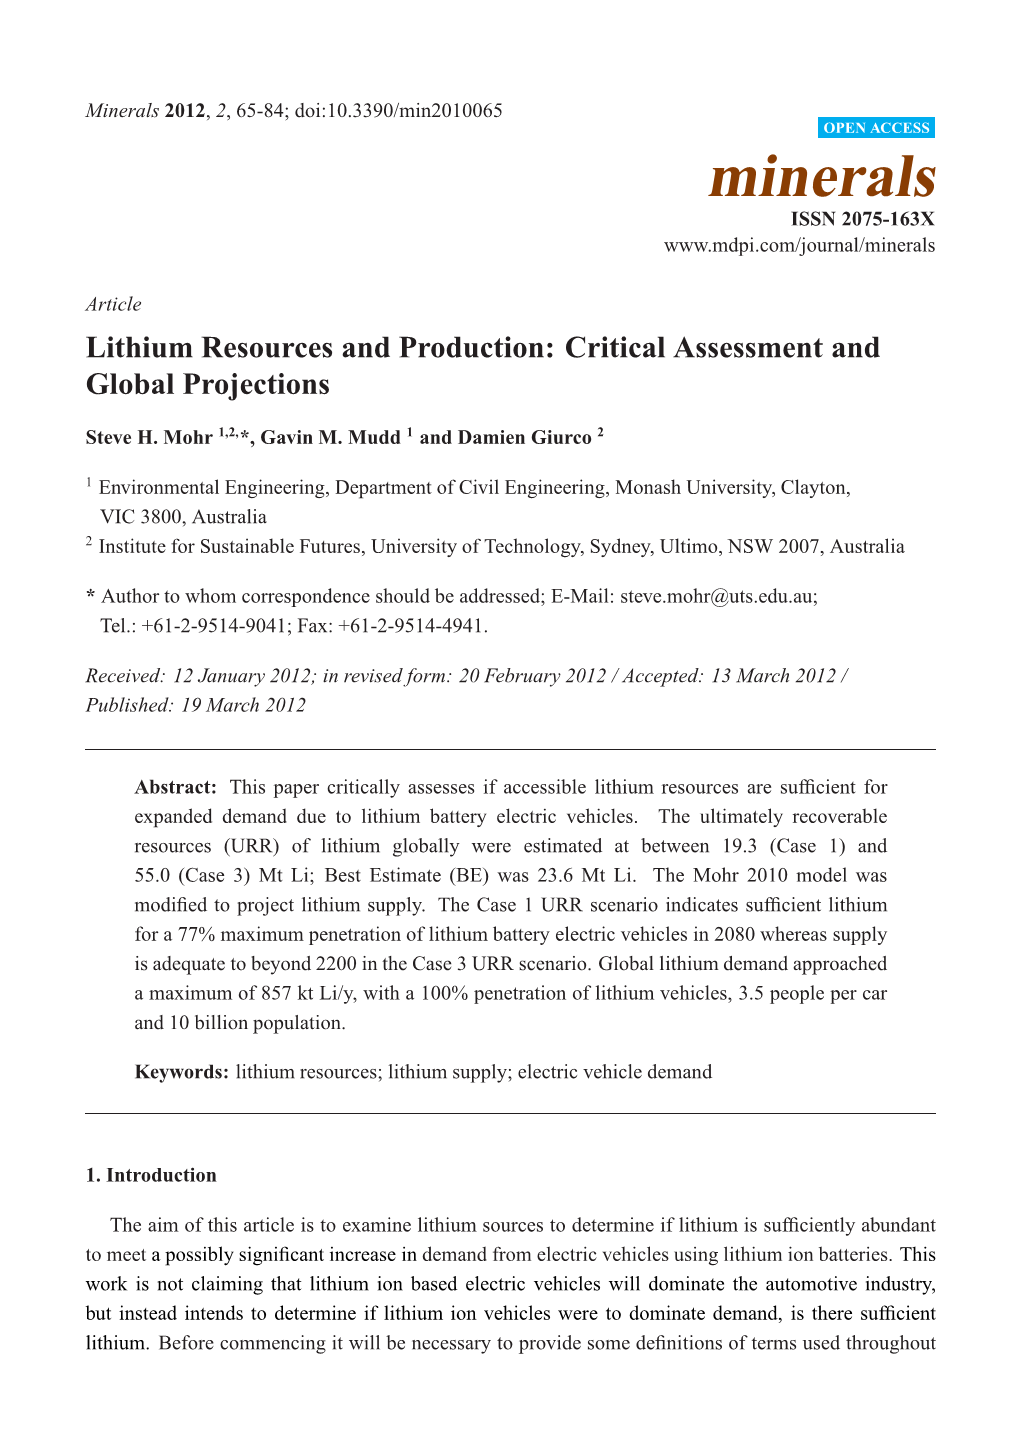 Lithium Resources and Production: Critical Assessment and Global Projections